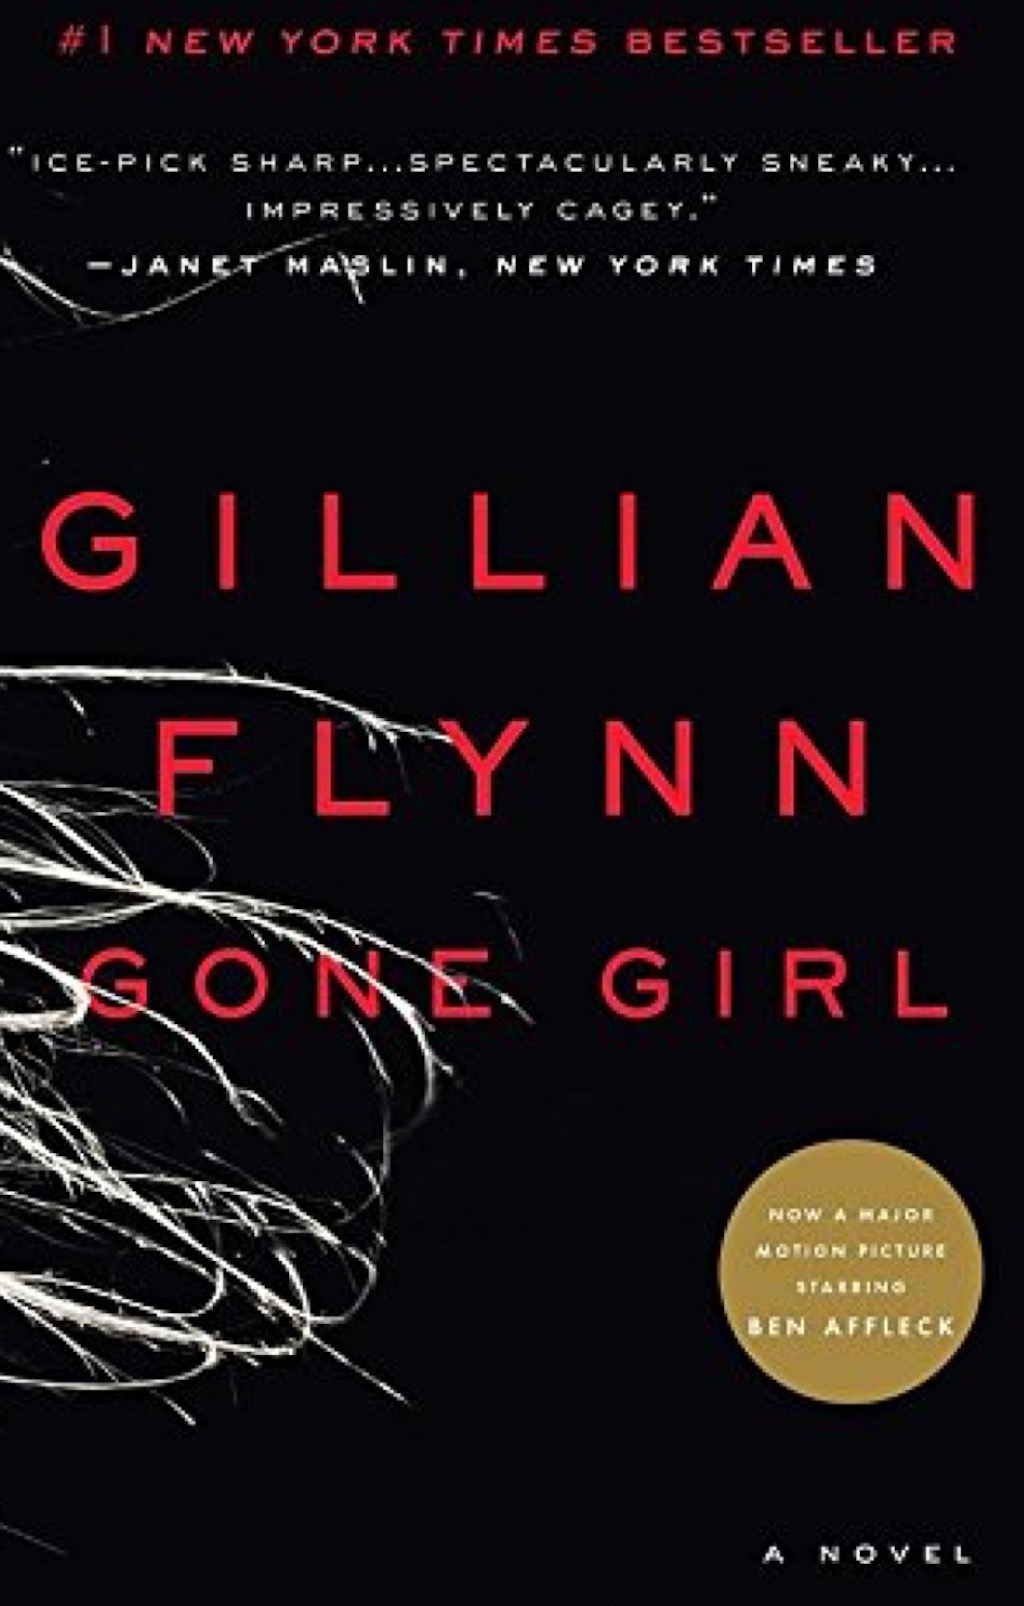 Gone Girl books every woman should read in her 40s